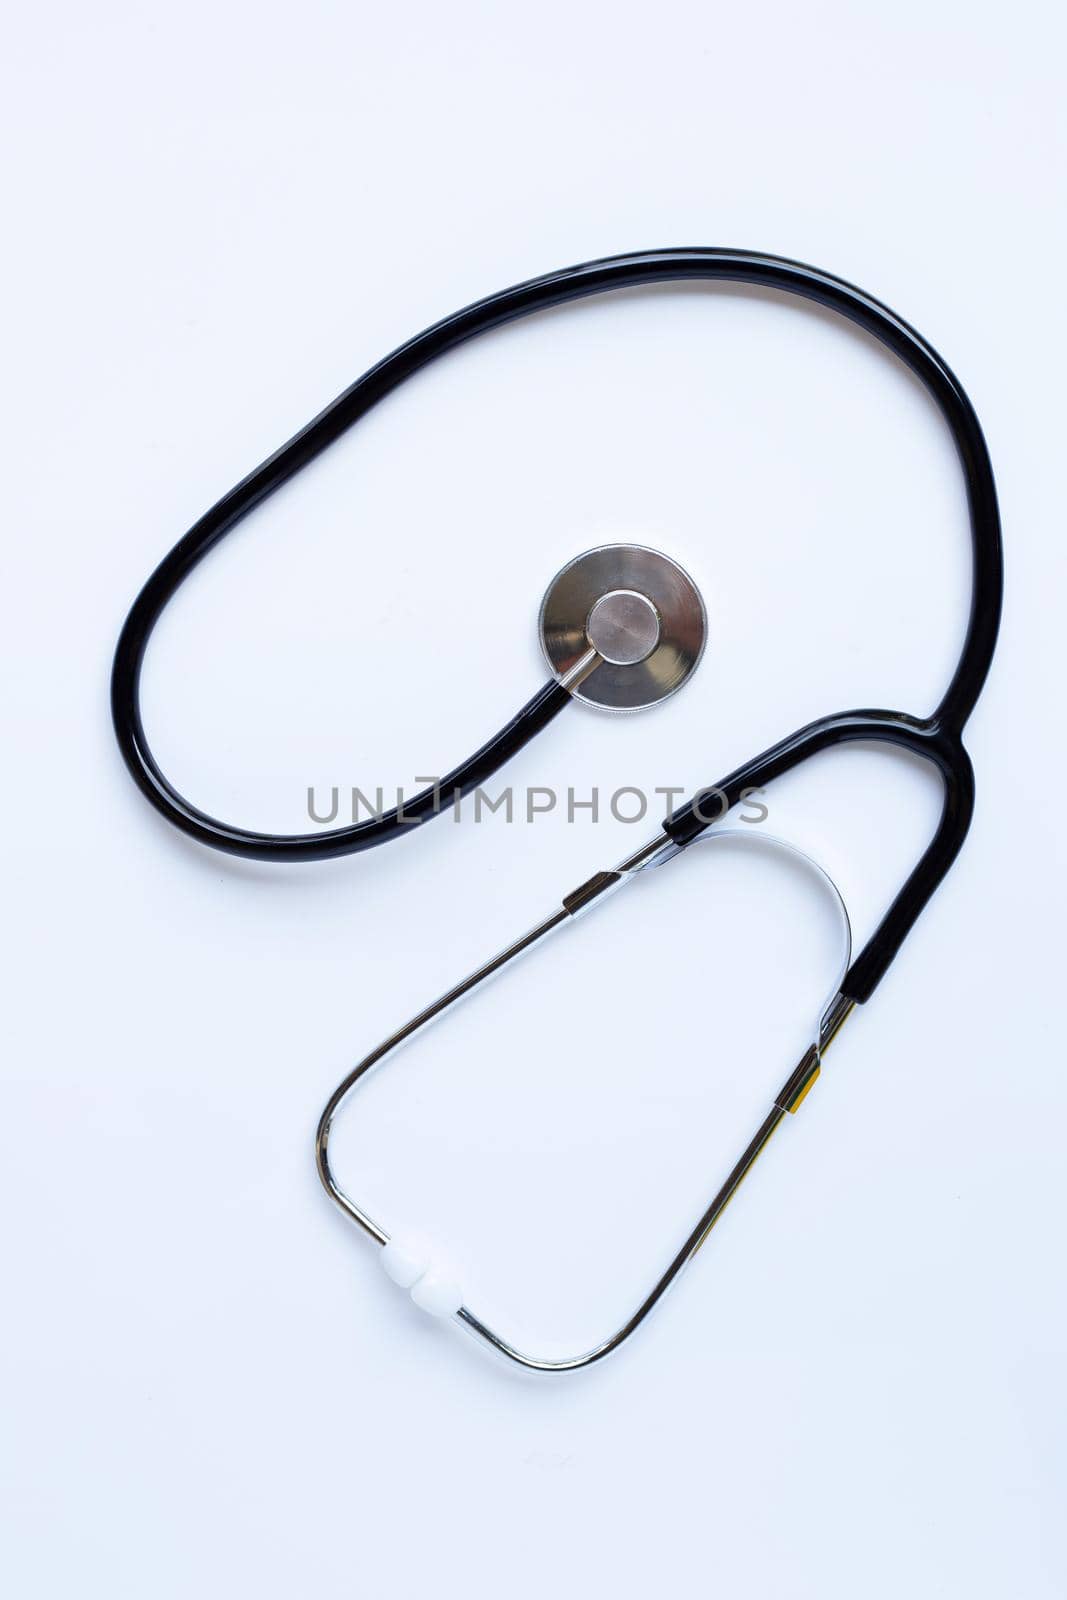 Stethoscope on white background. copy space by Bowonpat